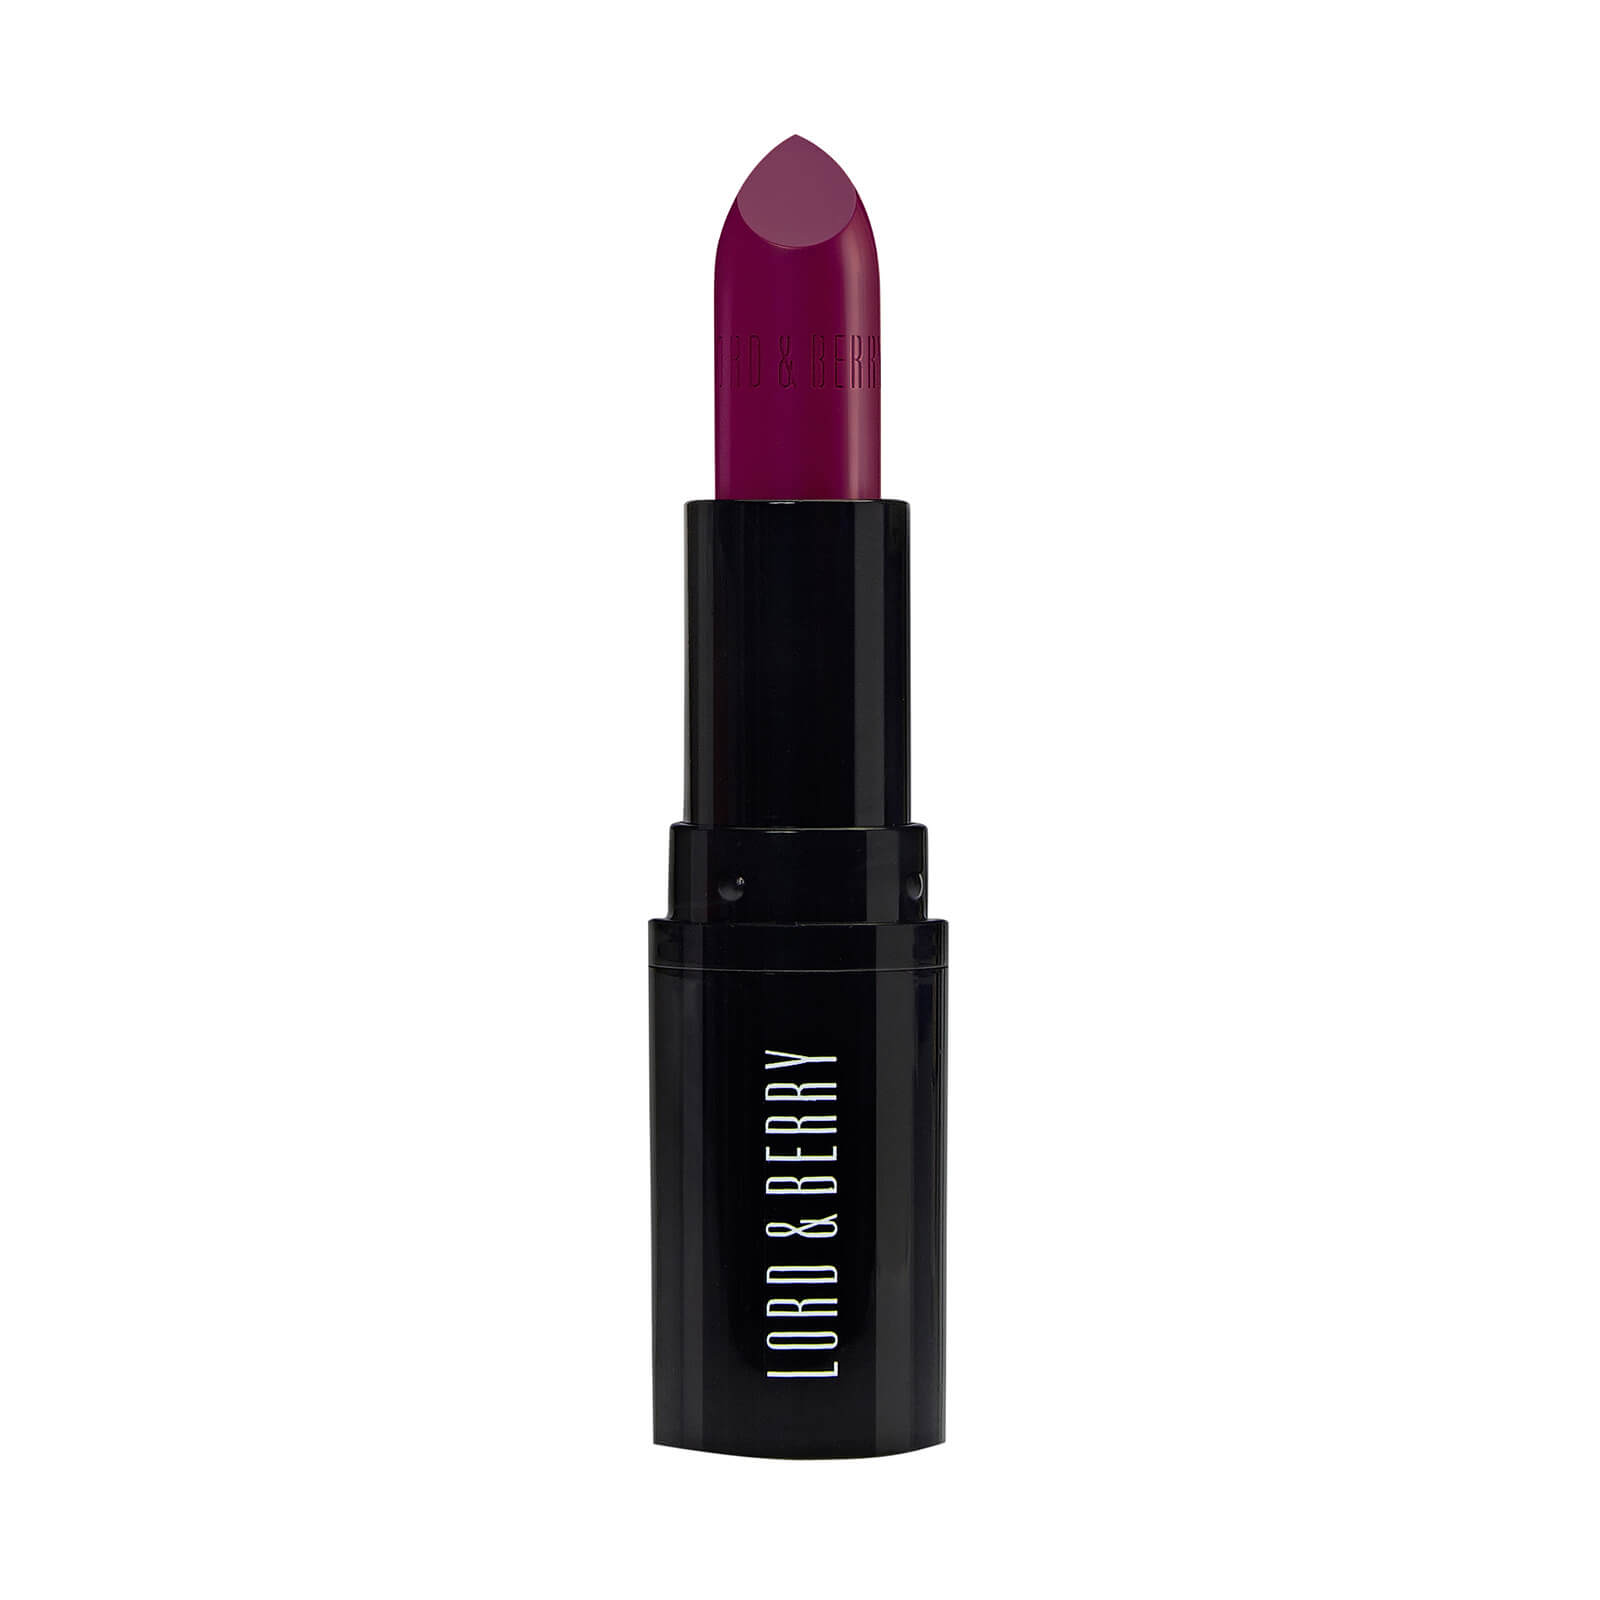 Image of Lord & Berry Absolute Lipstick 23g (Various Shades) - Renaissance